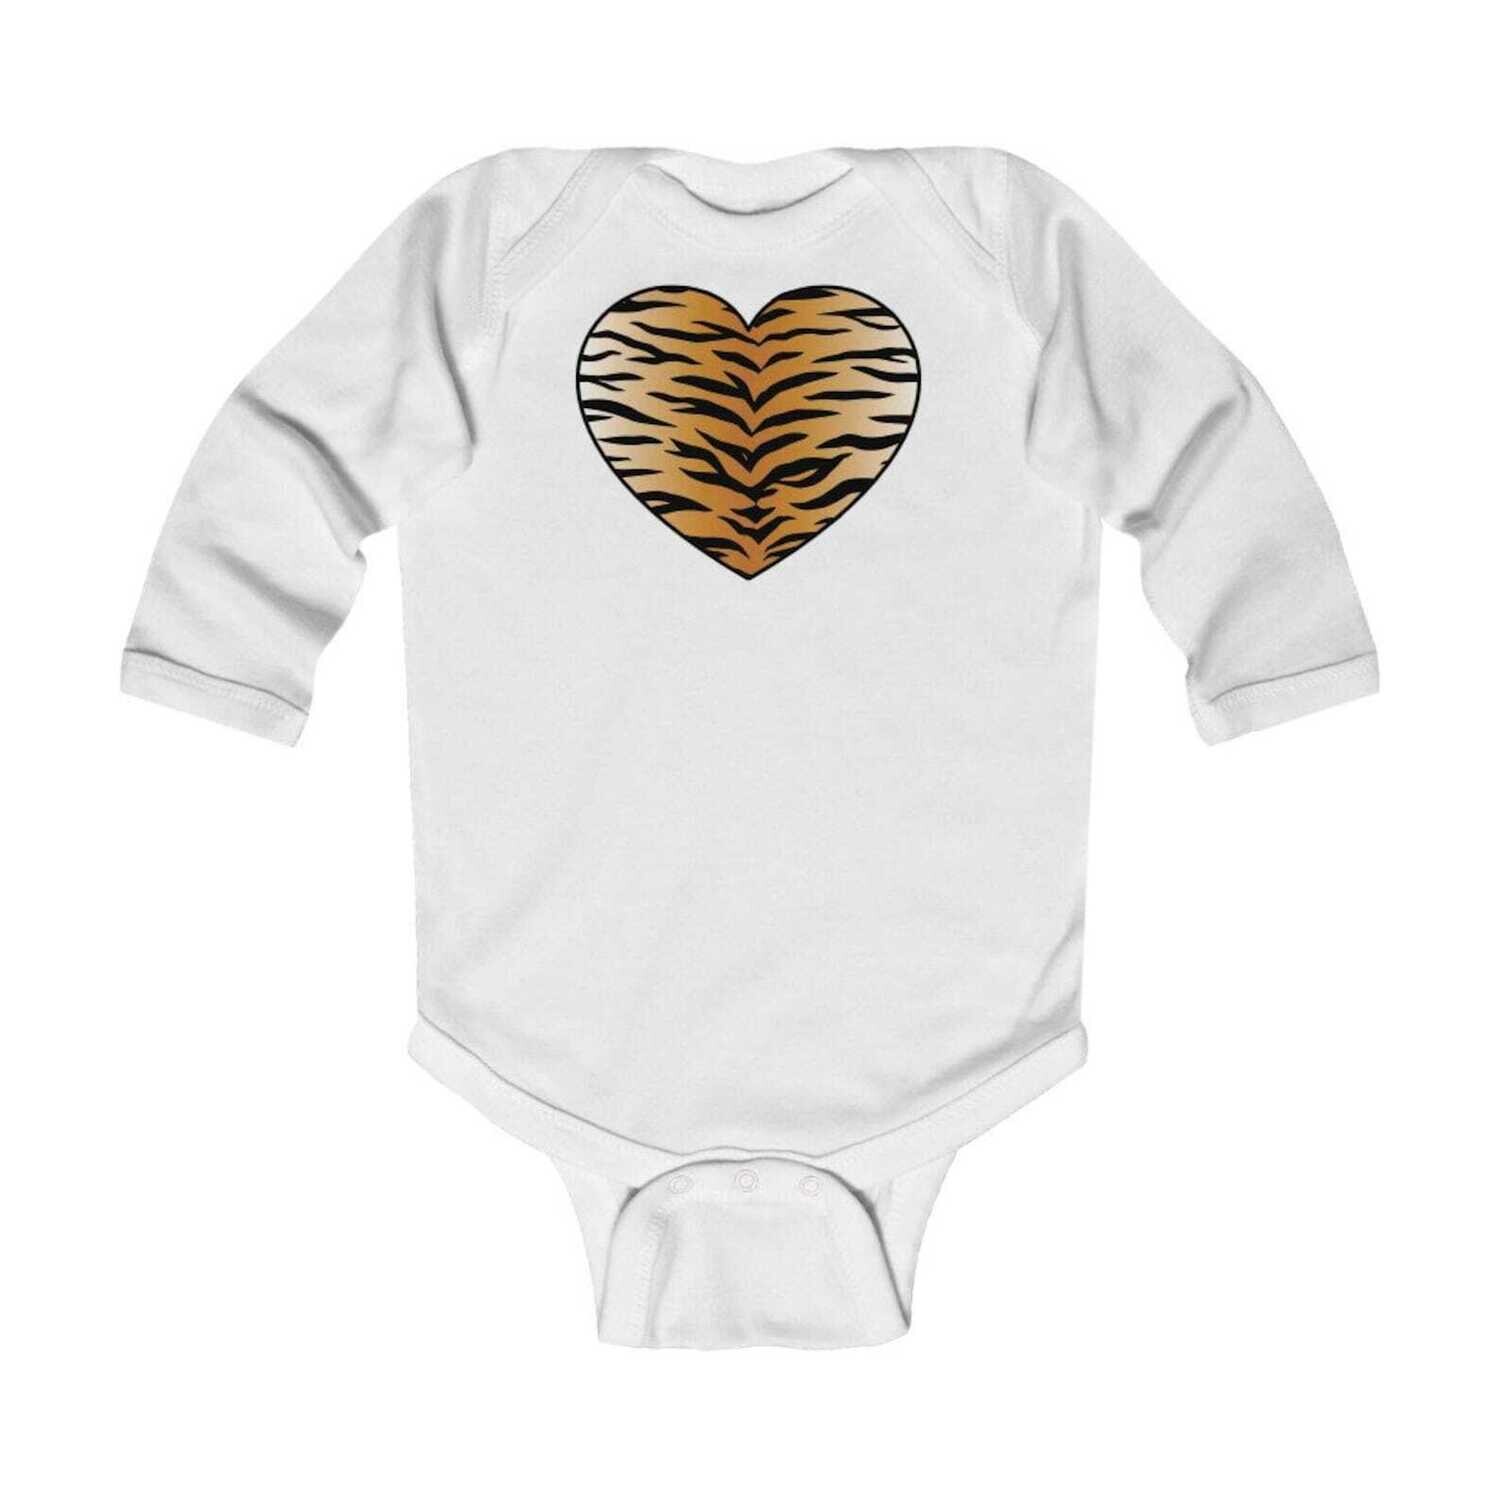 Made in Gift for Animal Lovers Gift for Cat Lovers Baby long sleeve one piece bodysuit Tiger print 100% cotton soft baby onesie